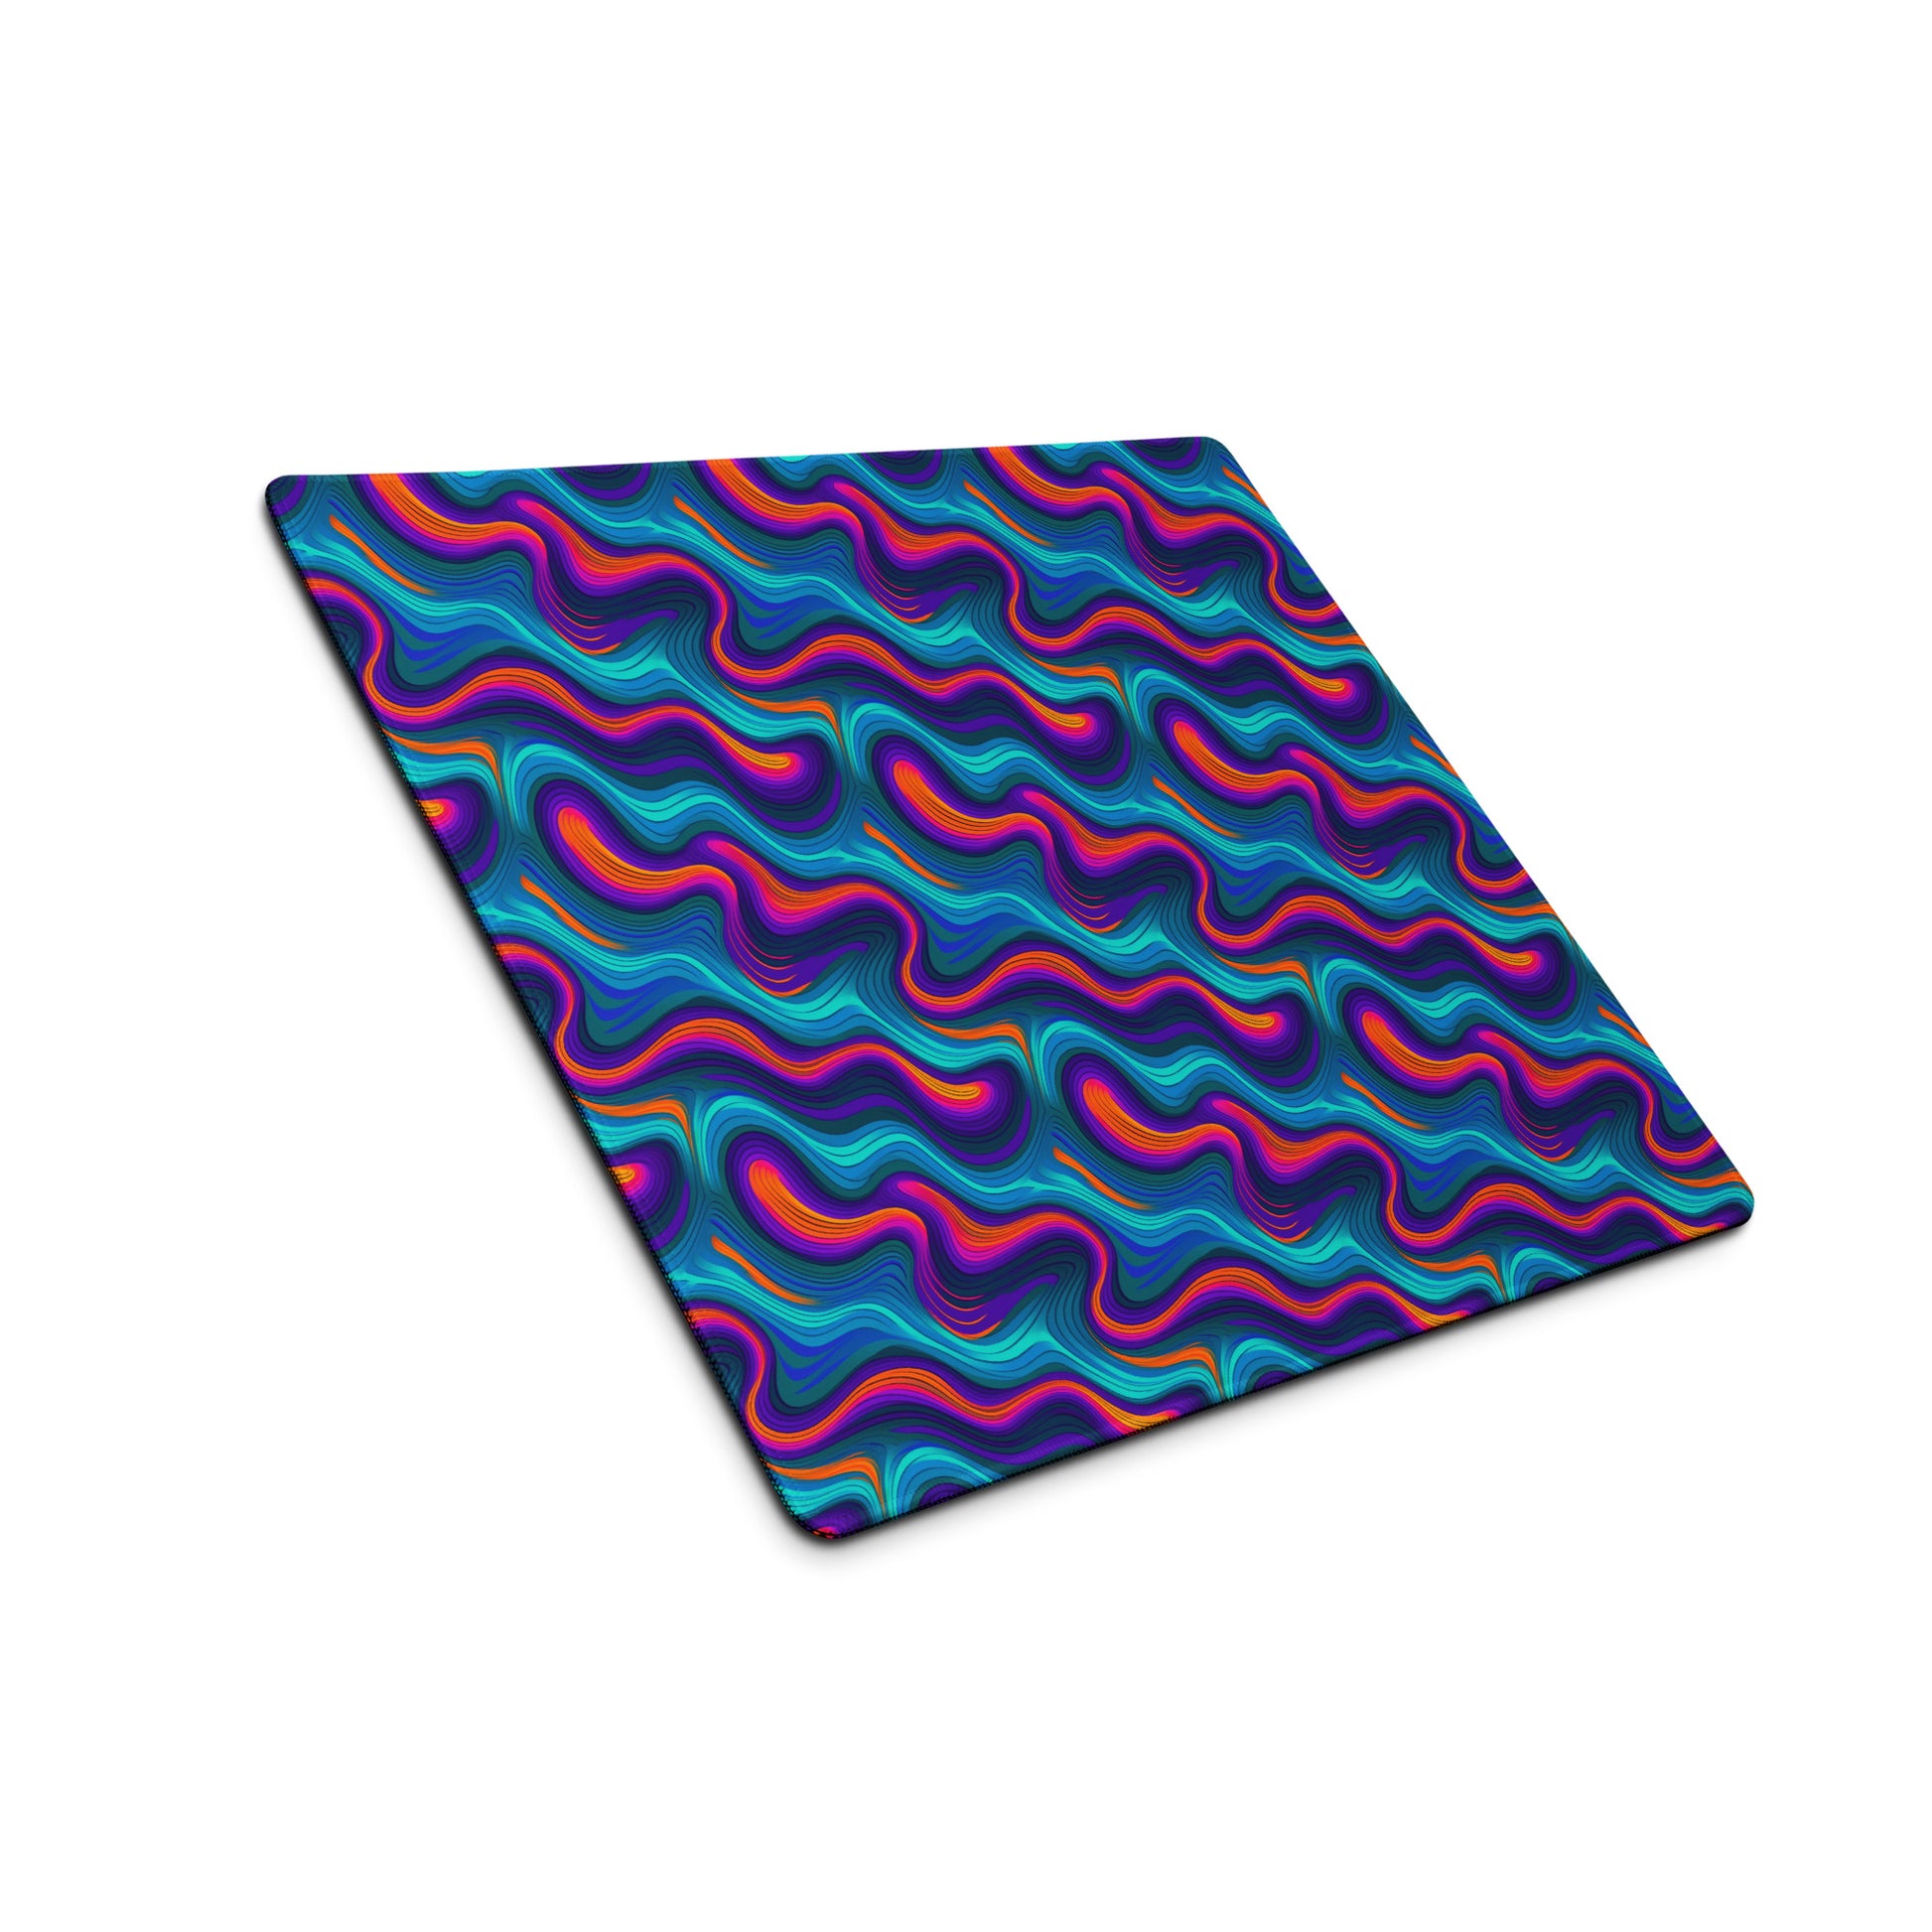 A 18" x 16" desk pad with blue and orange wavy pattern sitting at an angle.